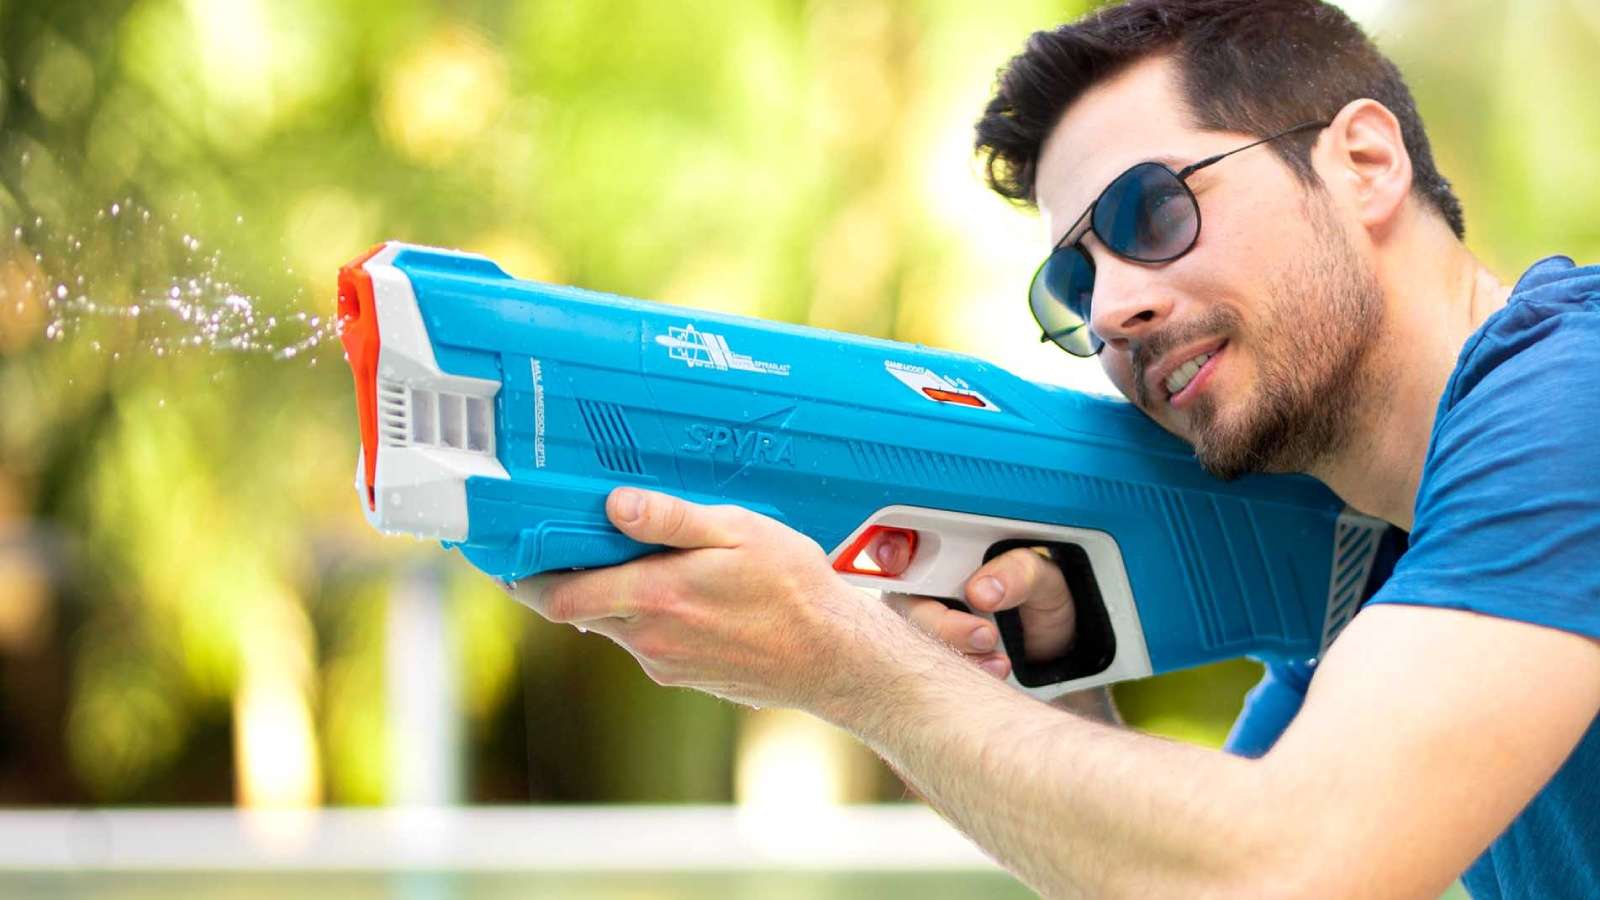 Man holding a SpyraThree Gun, with it shooting water